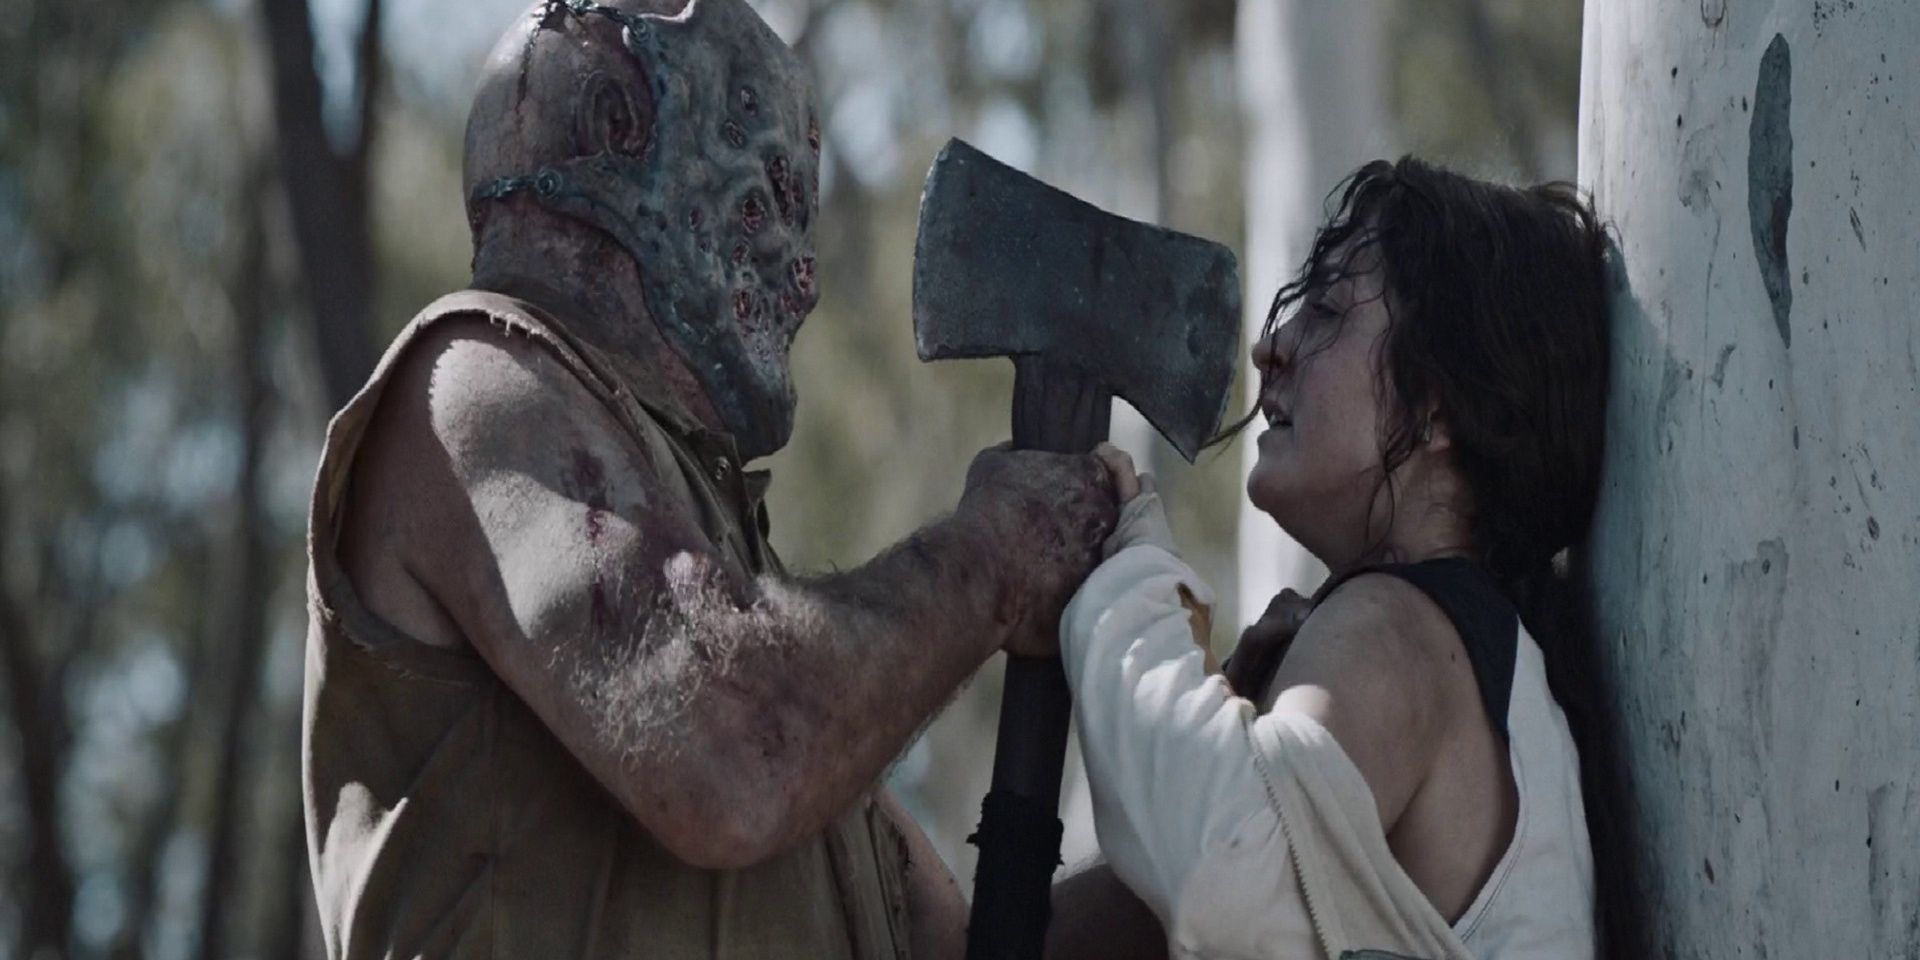 A masked killer holding an axe to a woman's face